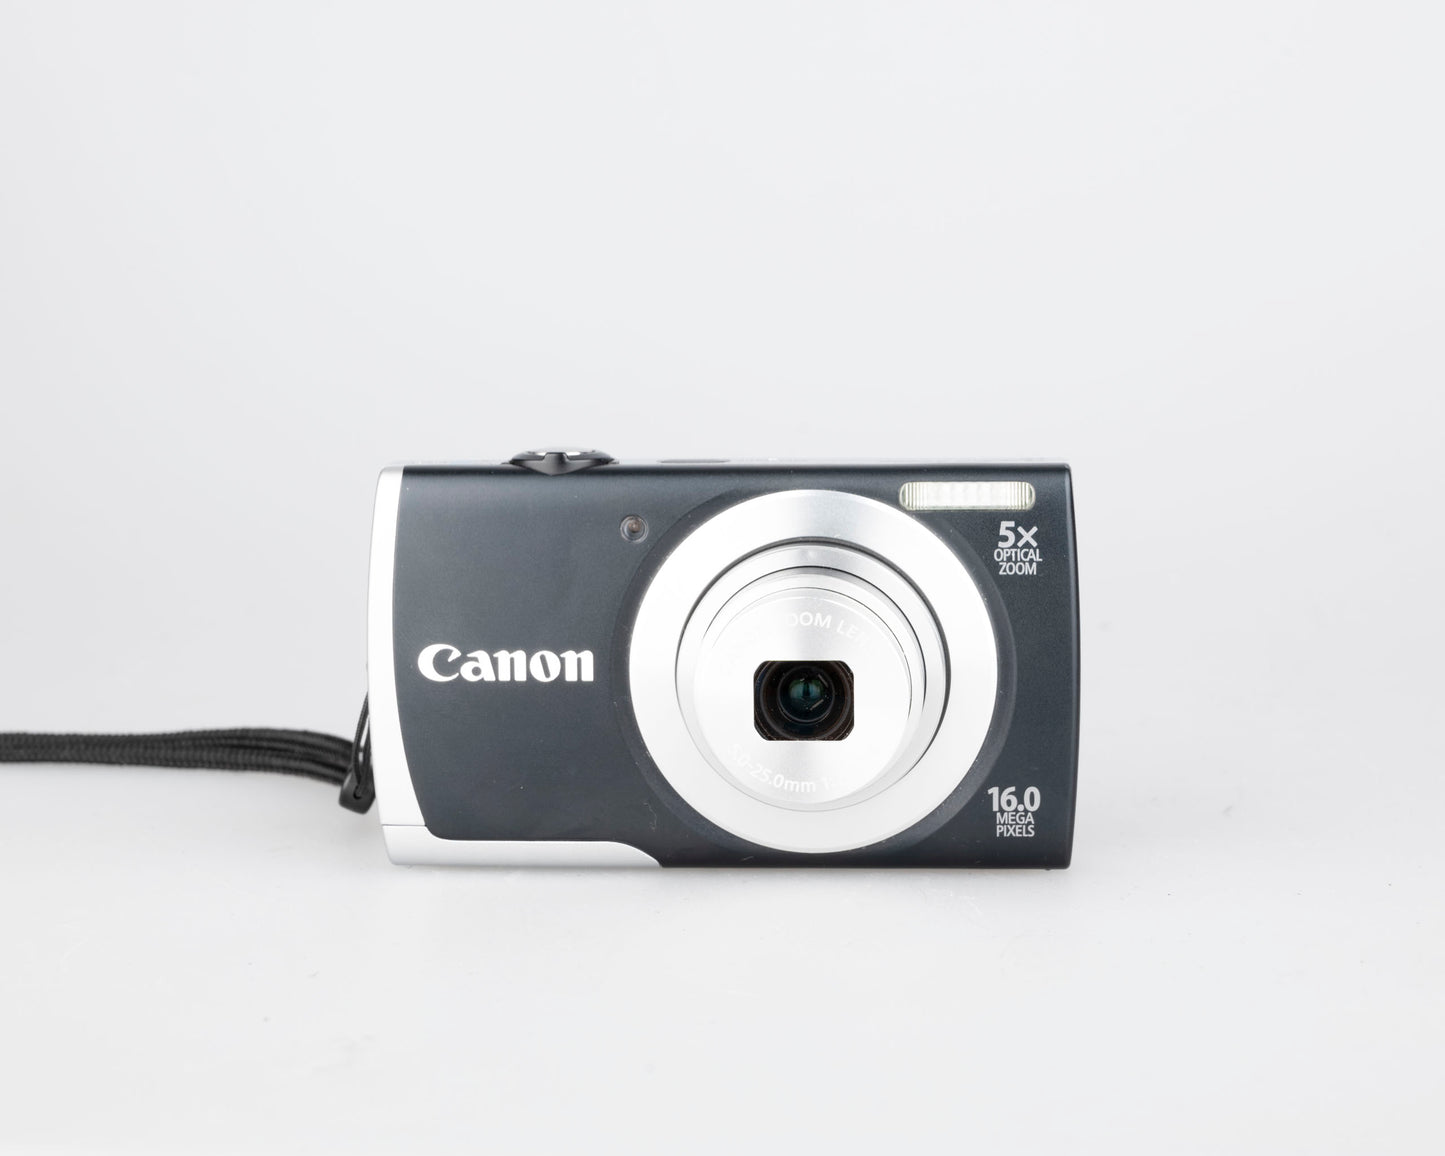 Canon Powershot A2600 digicam w/ 16MP CCD sensor w/ 8GB SD card + battery + charger